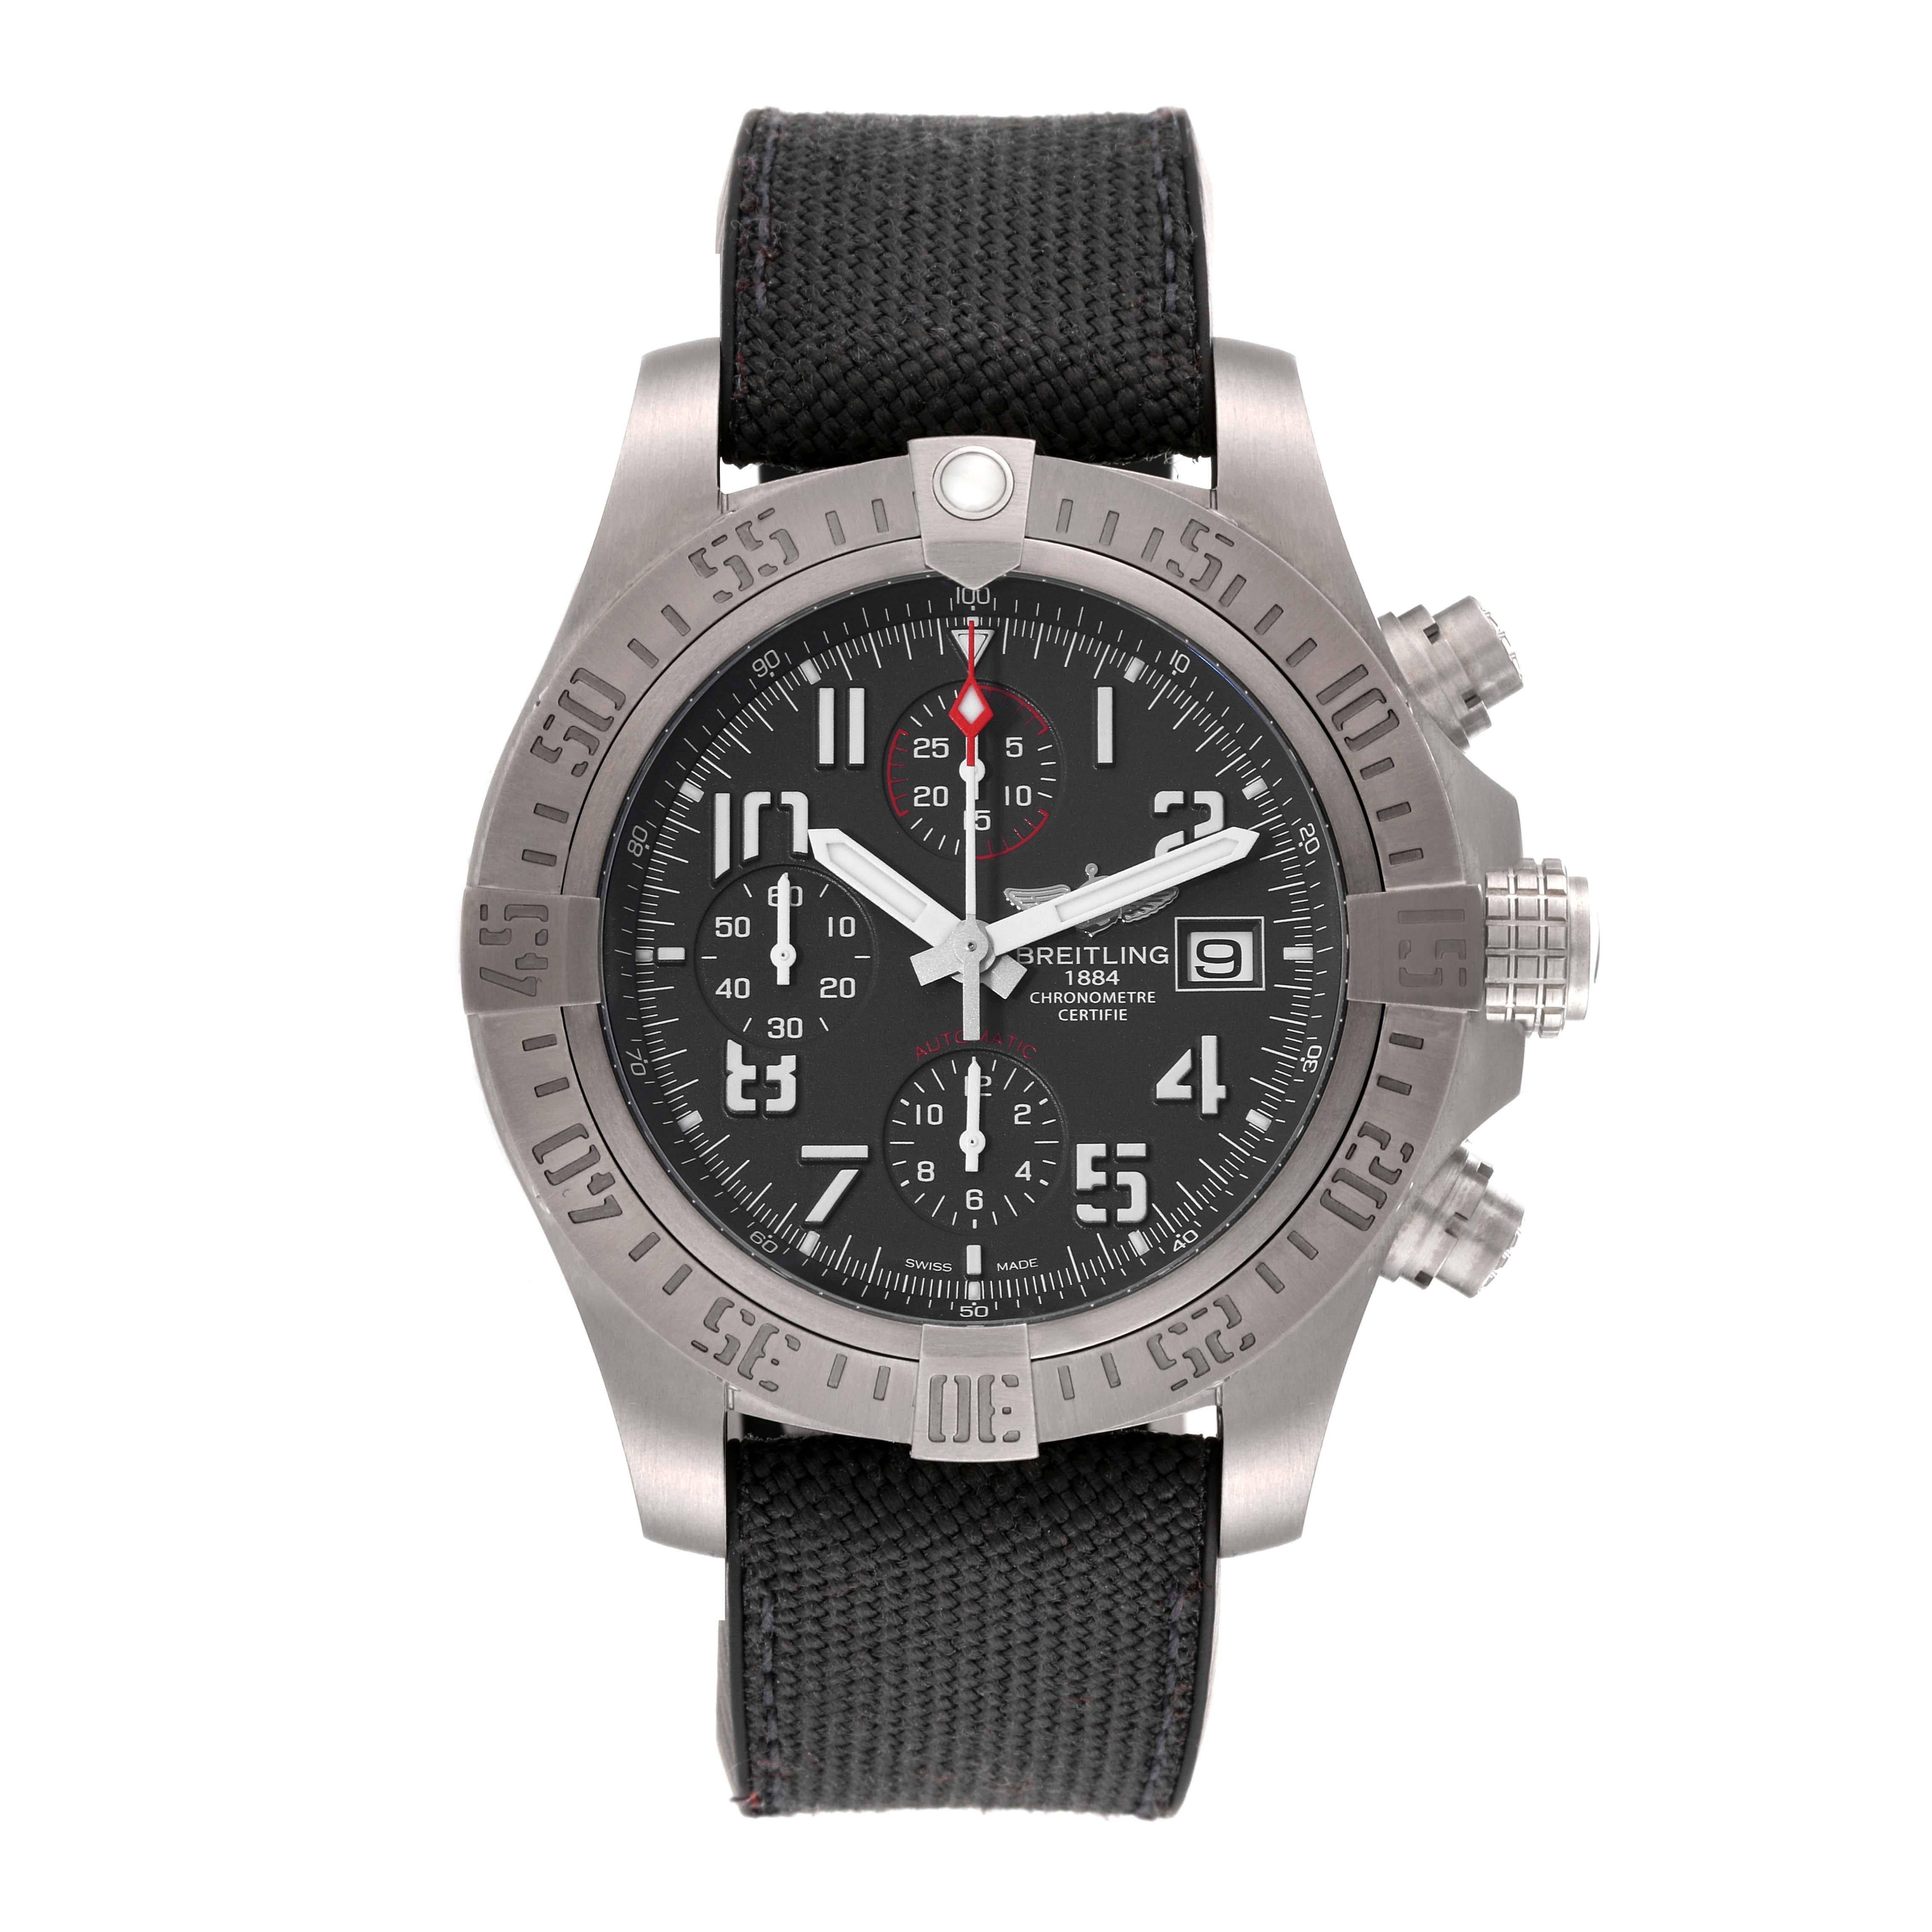 Breitling Avenger Bandit Chronograph Grey Dial Titanium Mens Watch E13383. Automatic self-winding movement. Chronograph function. Titanium case 45 mm in diameter with pushers and screwed-down crown. Titanium unidirectional rotating bezel. 0-60